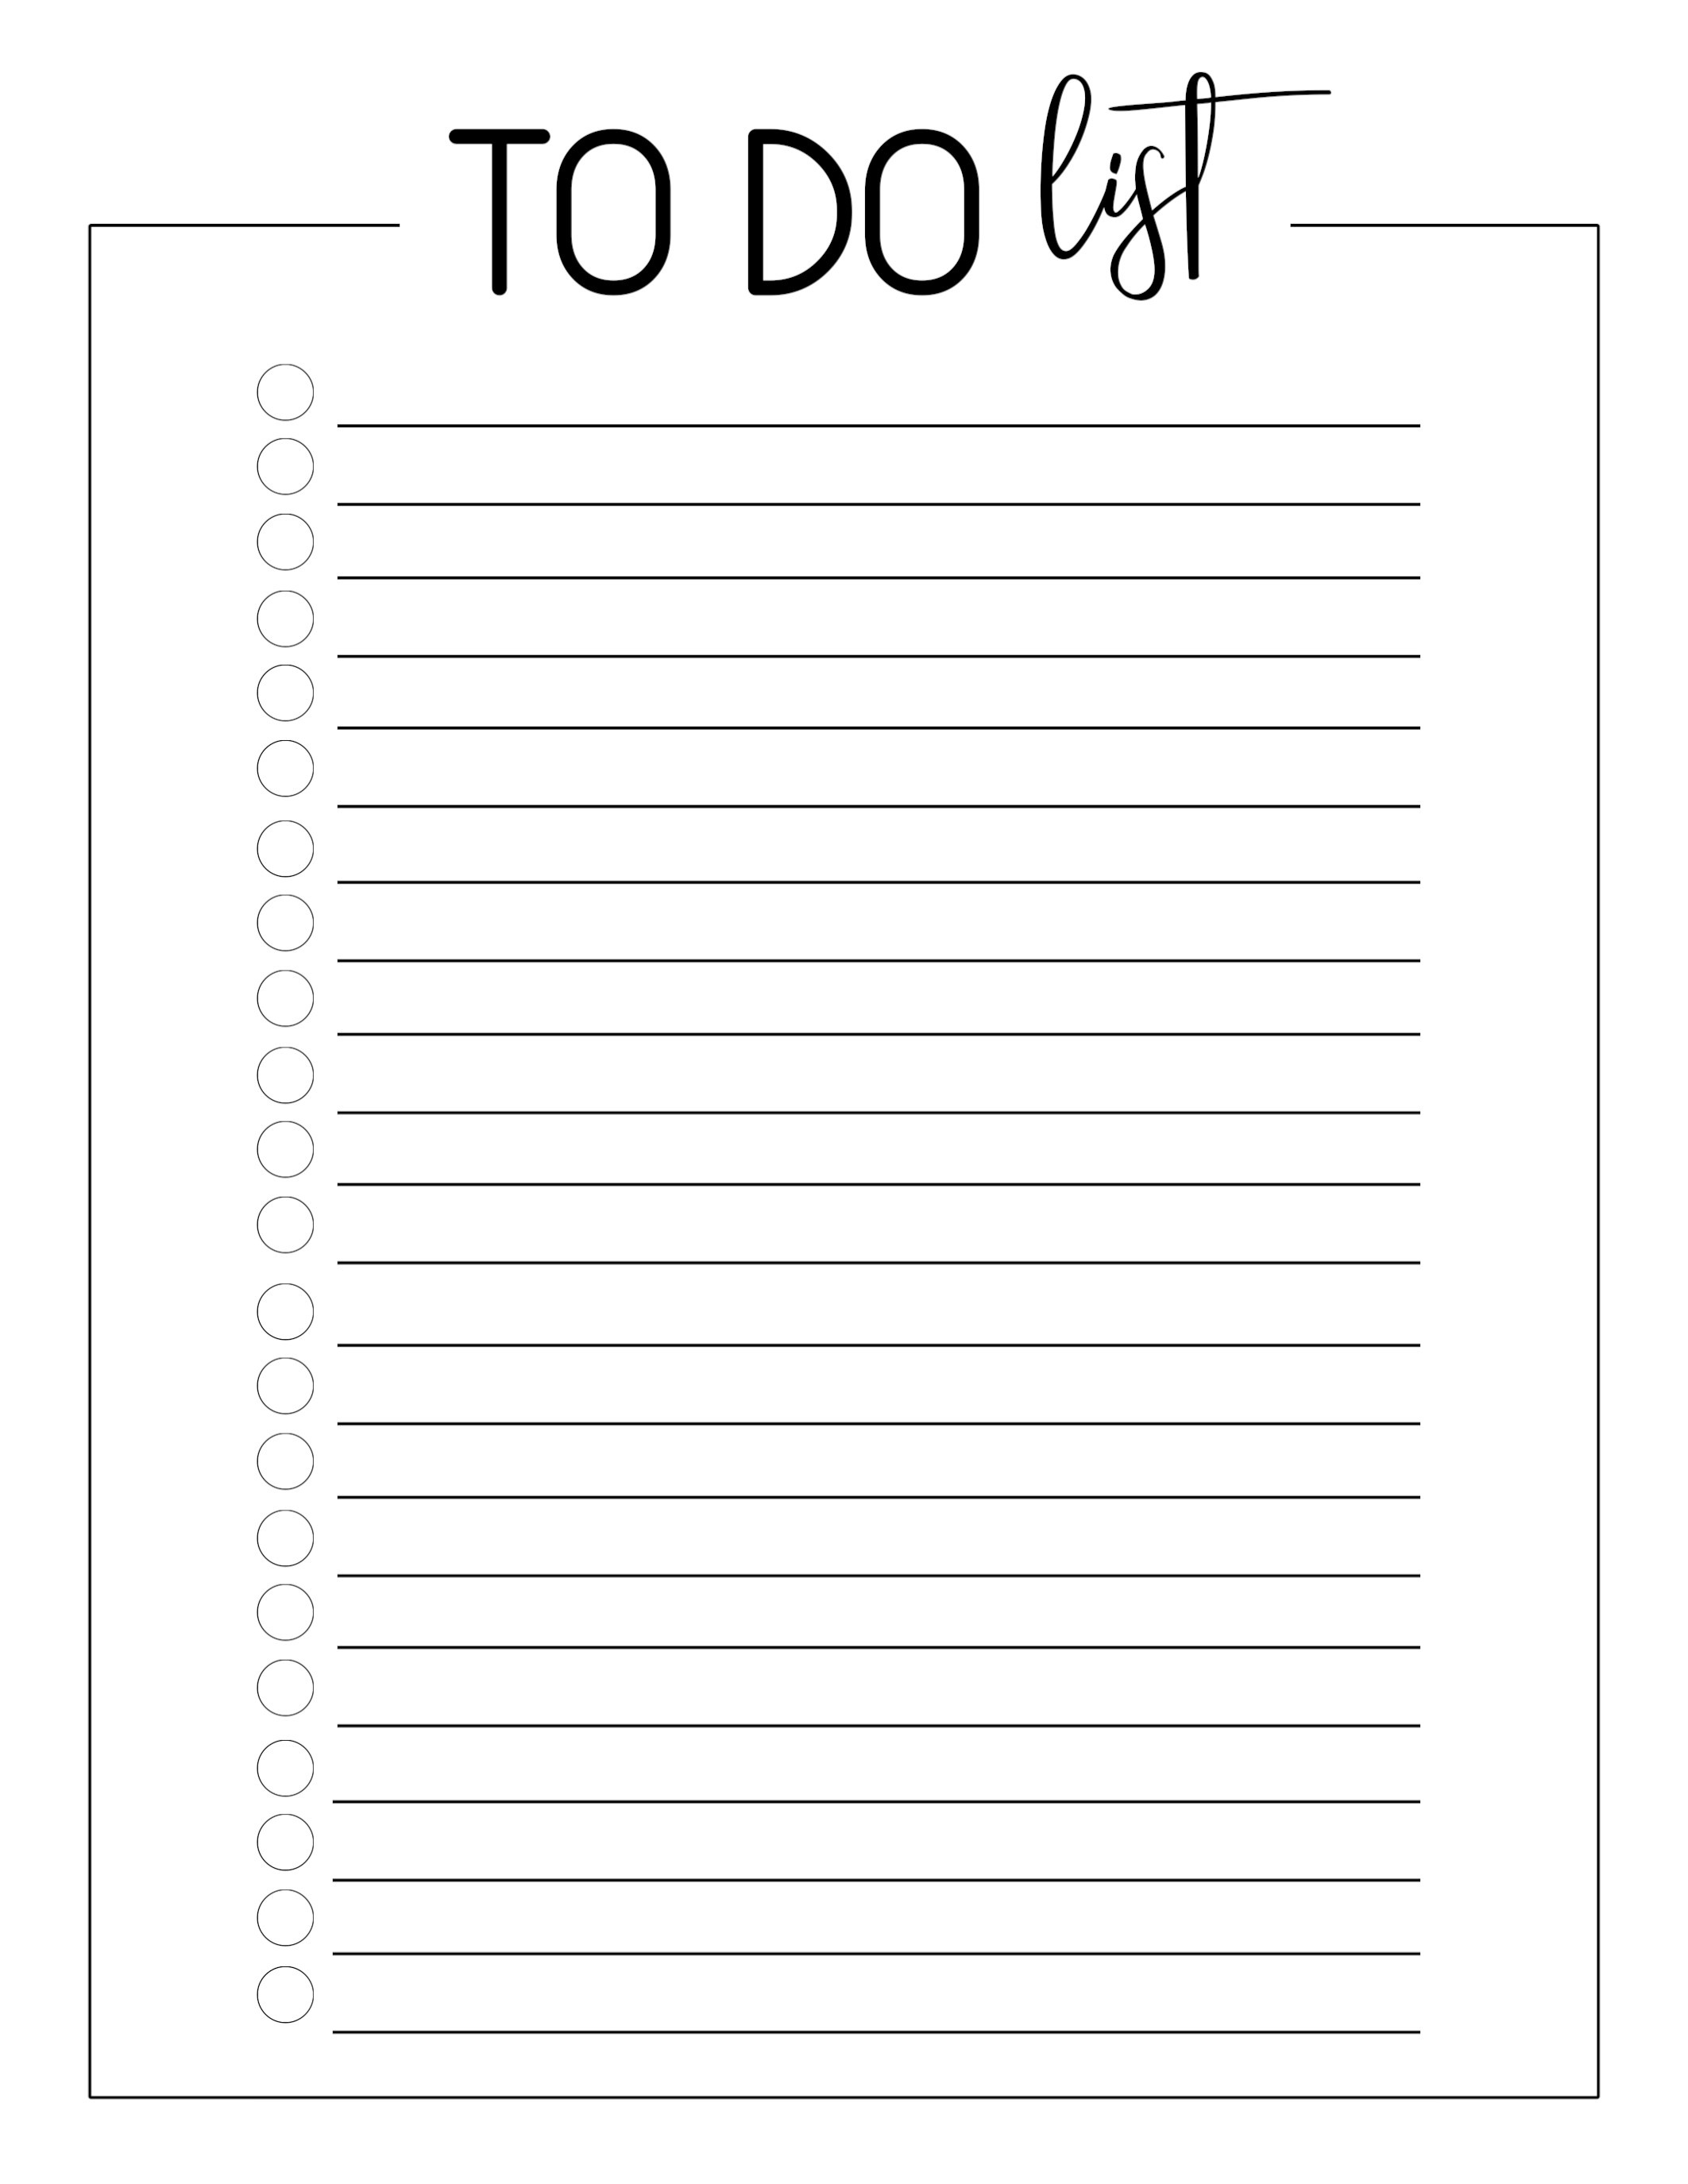 Free Printable To Do Checklist Template Paper Trail Design To Do List Free Printable 